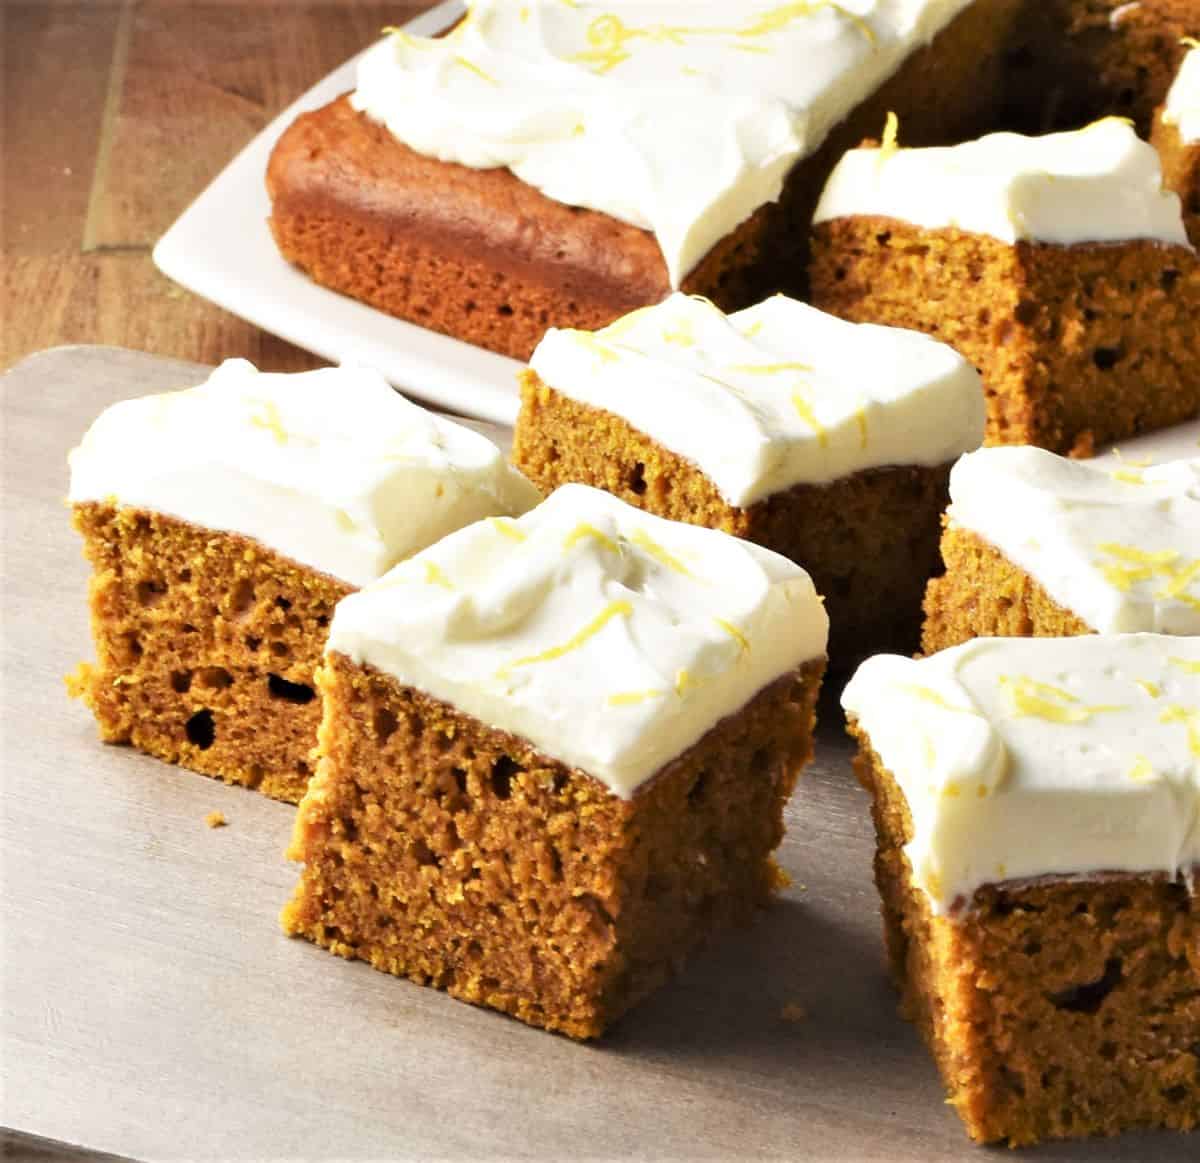 Side view of pumpkin cake slices.